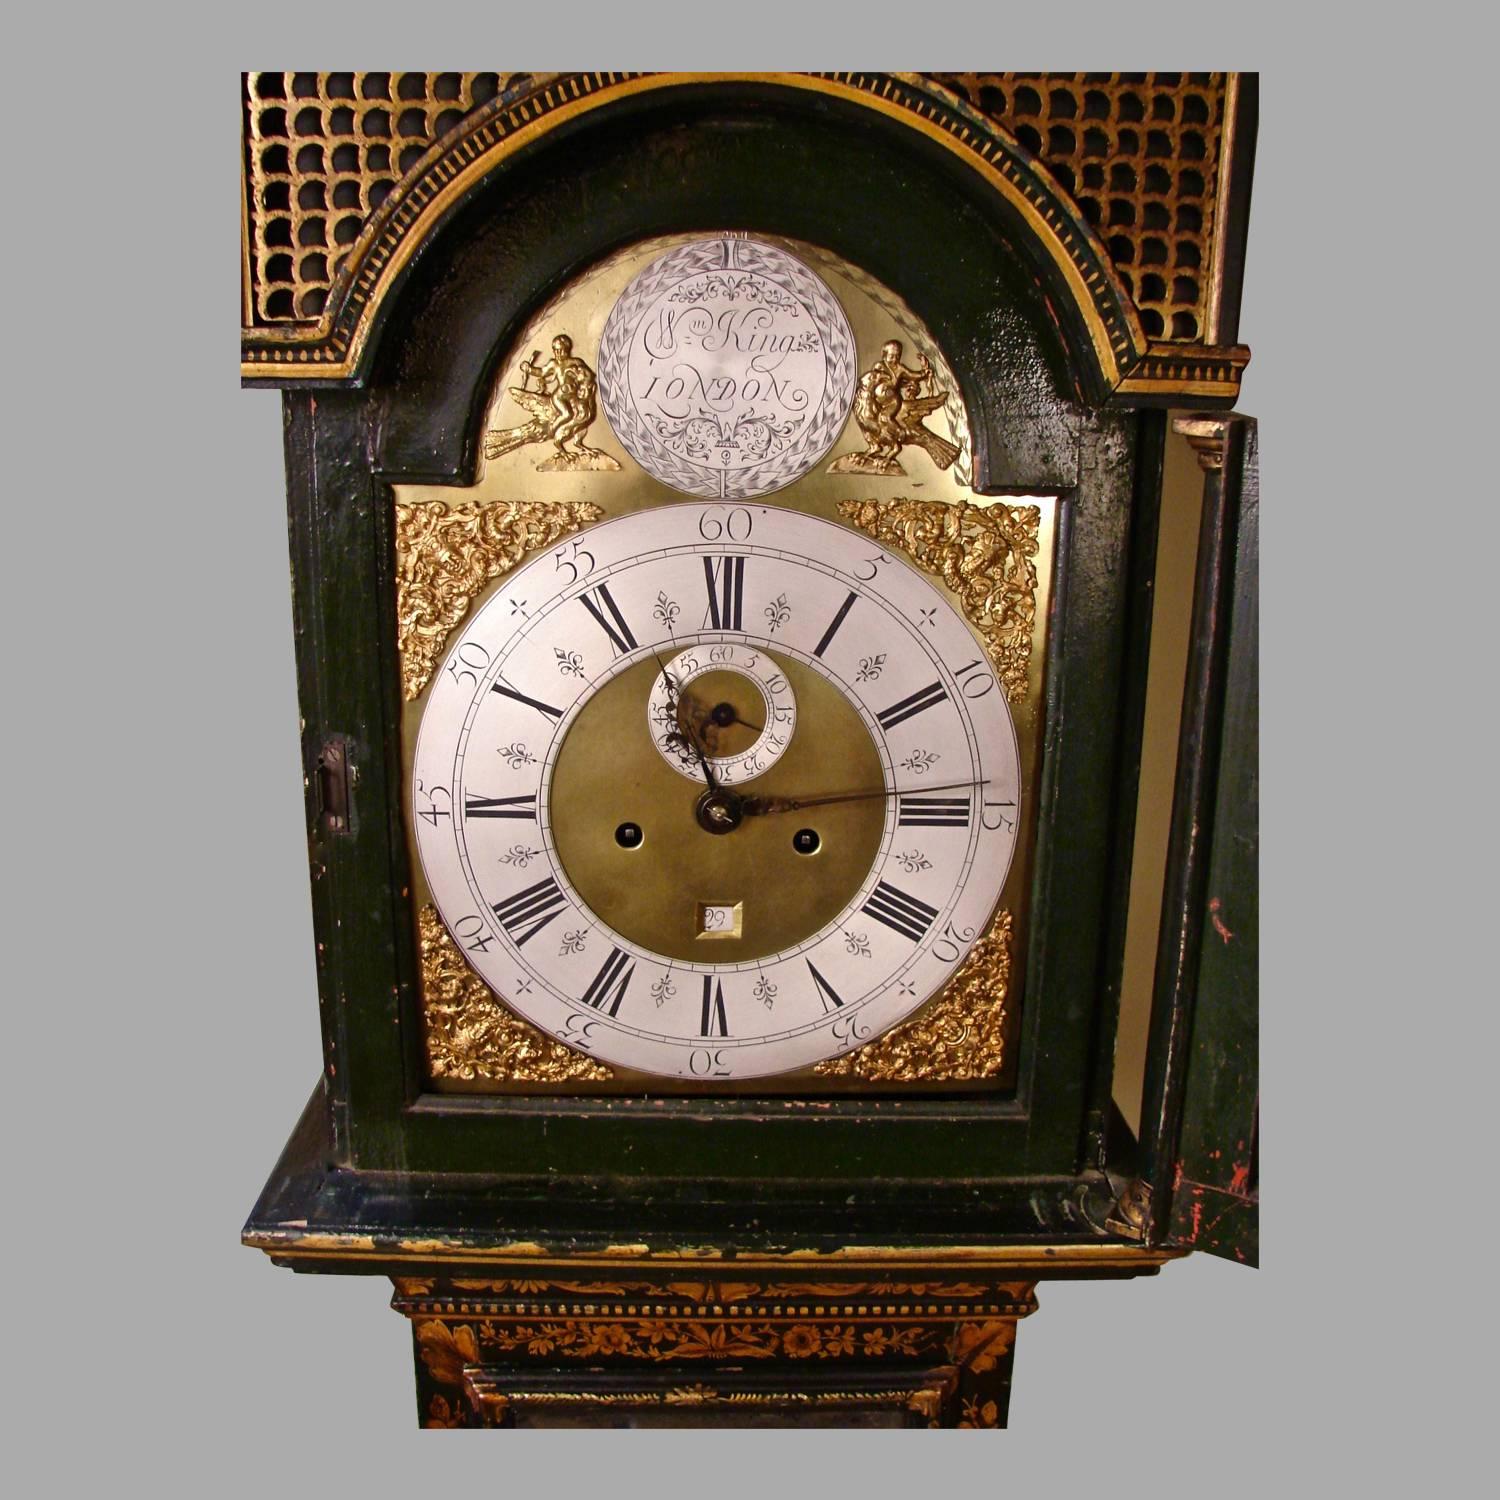 Early 18th Century Fine George I Green Japanned Tall Case Clock with Mirrored Door by William King